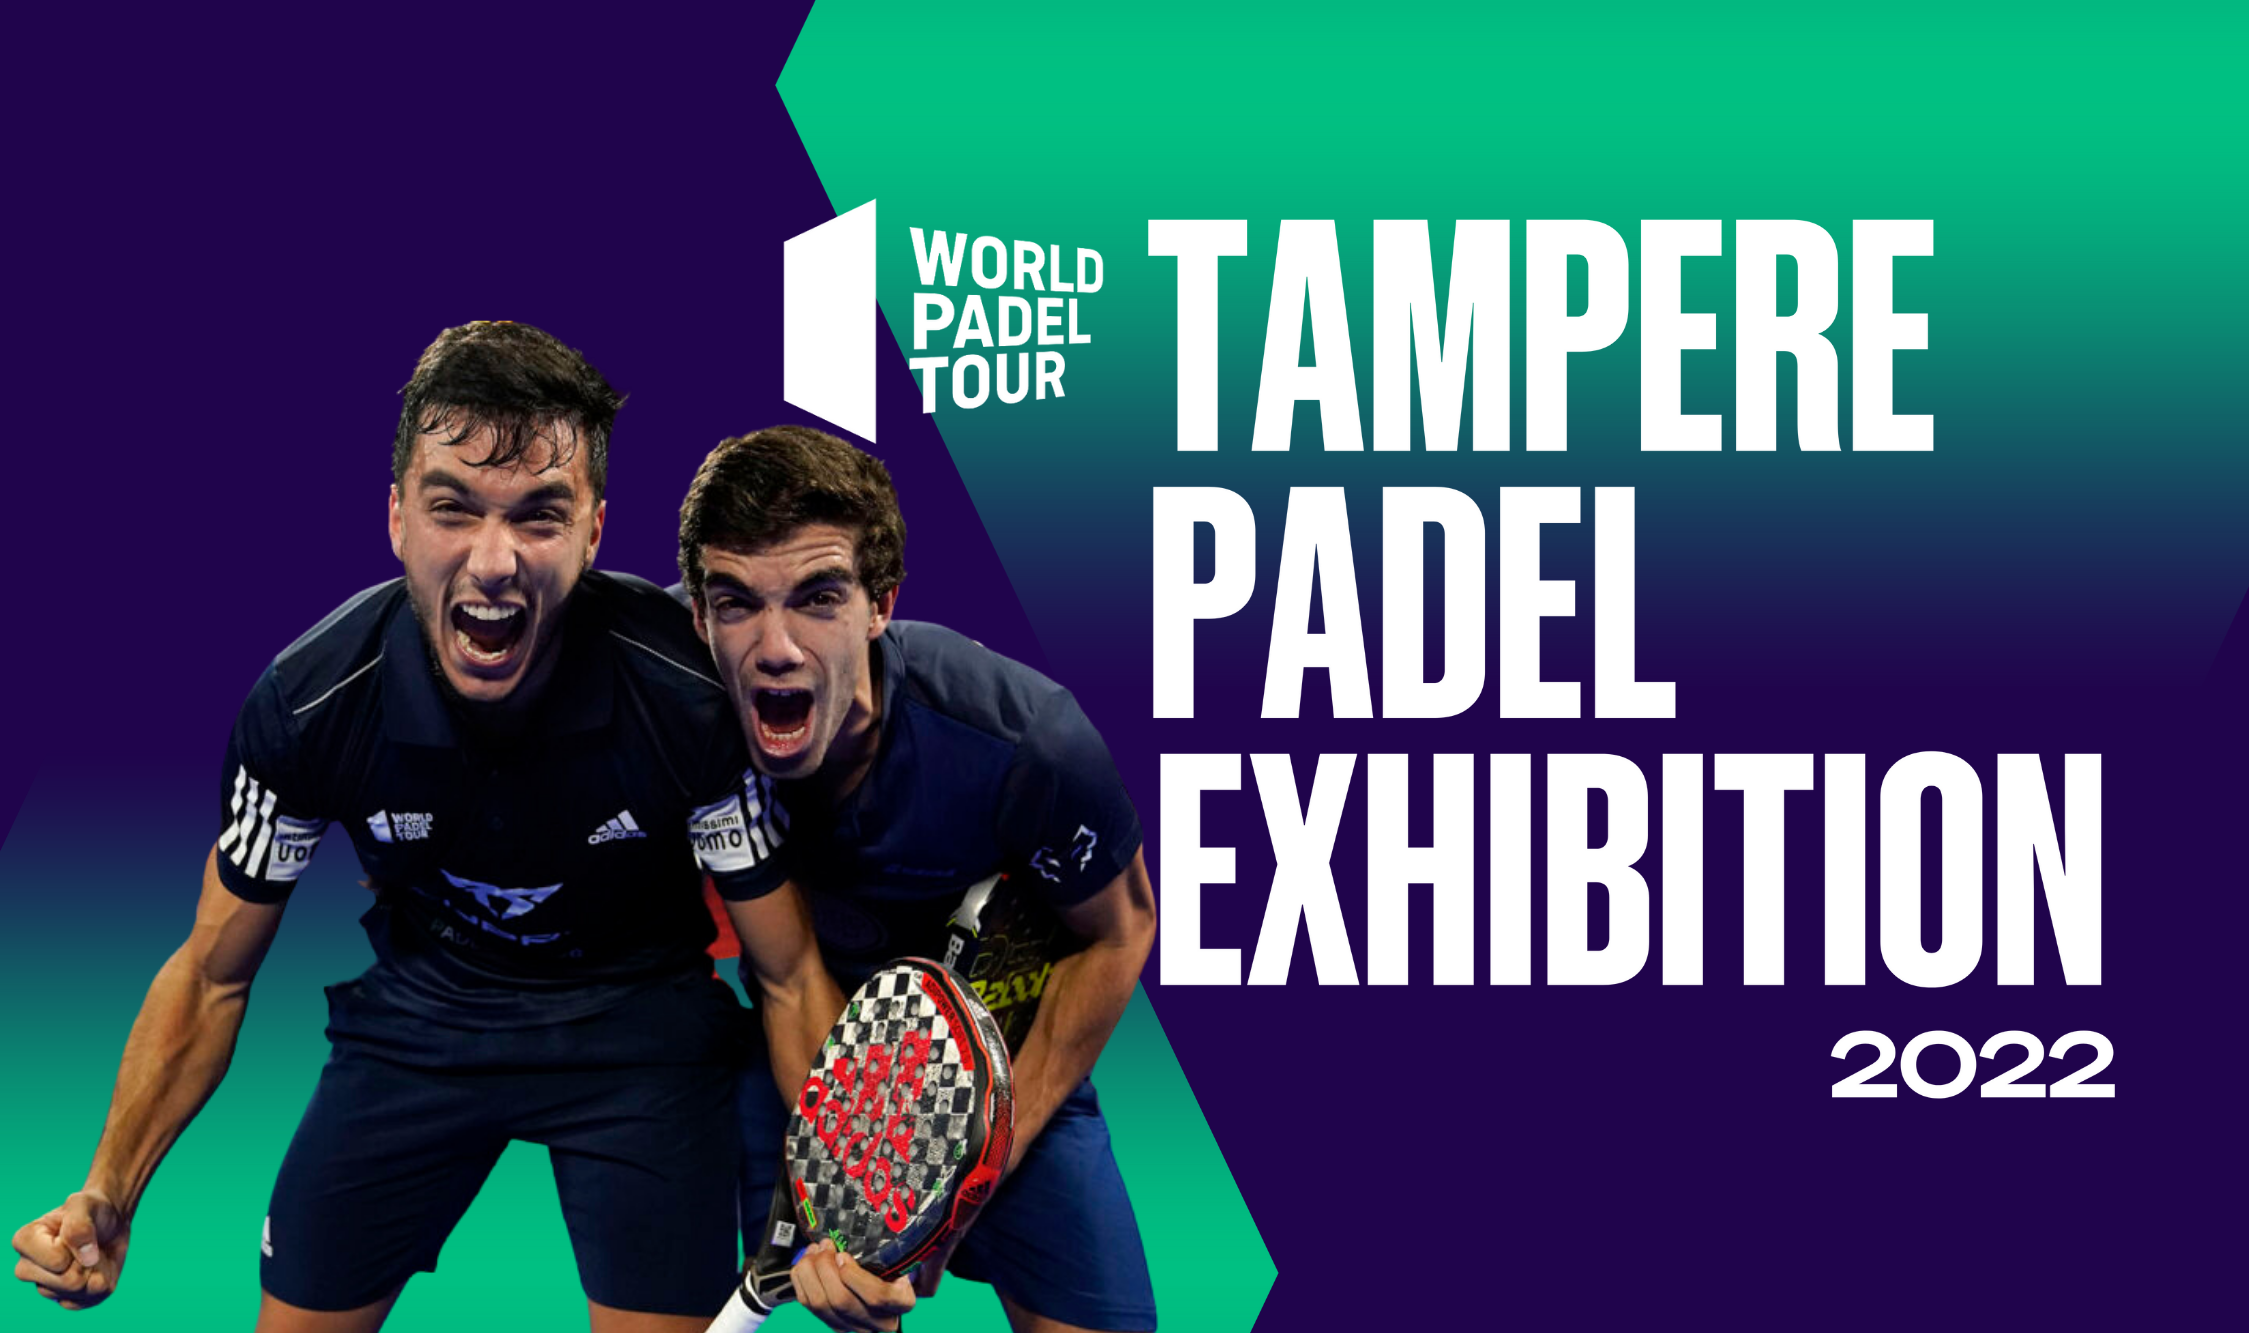 WPT - TAMPERE PADEL EXHIBITION - FRIDAY - VIP GOLD BOX